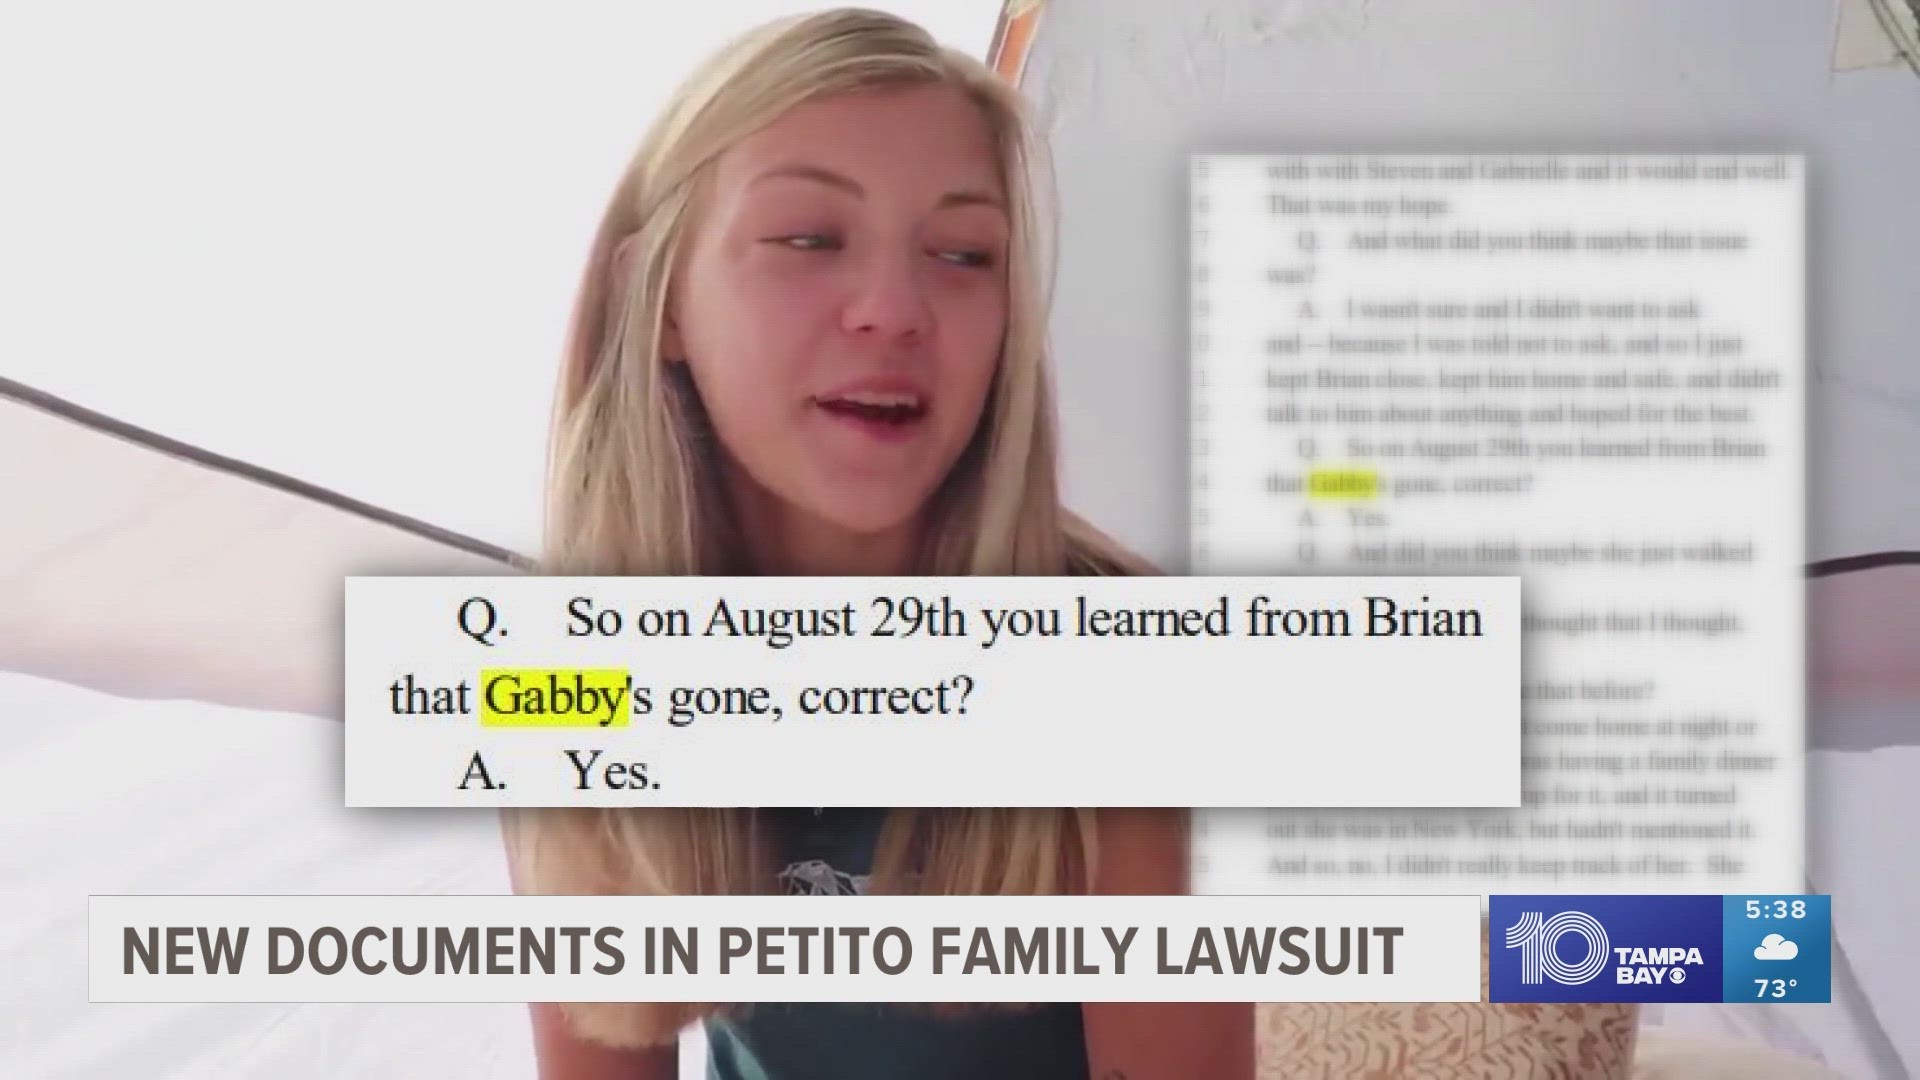 The documents show that in the days following Gabby's death, Brian Laundrie told his parents "Gabby's gone" and that they needed to hire a lawyer.